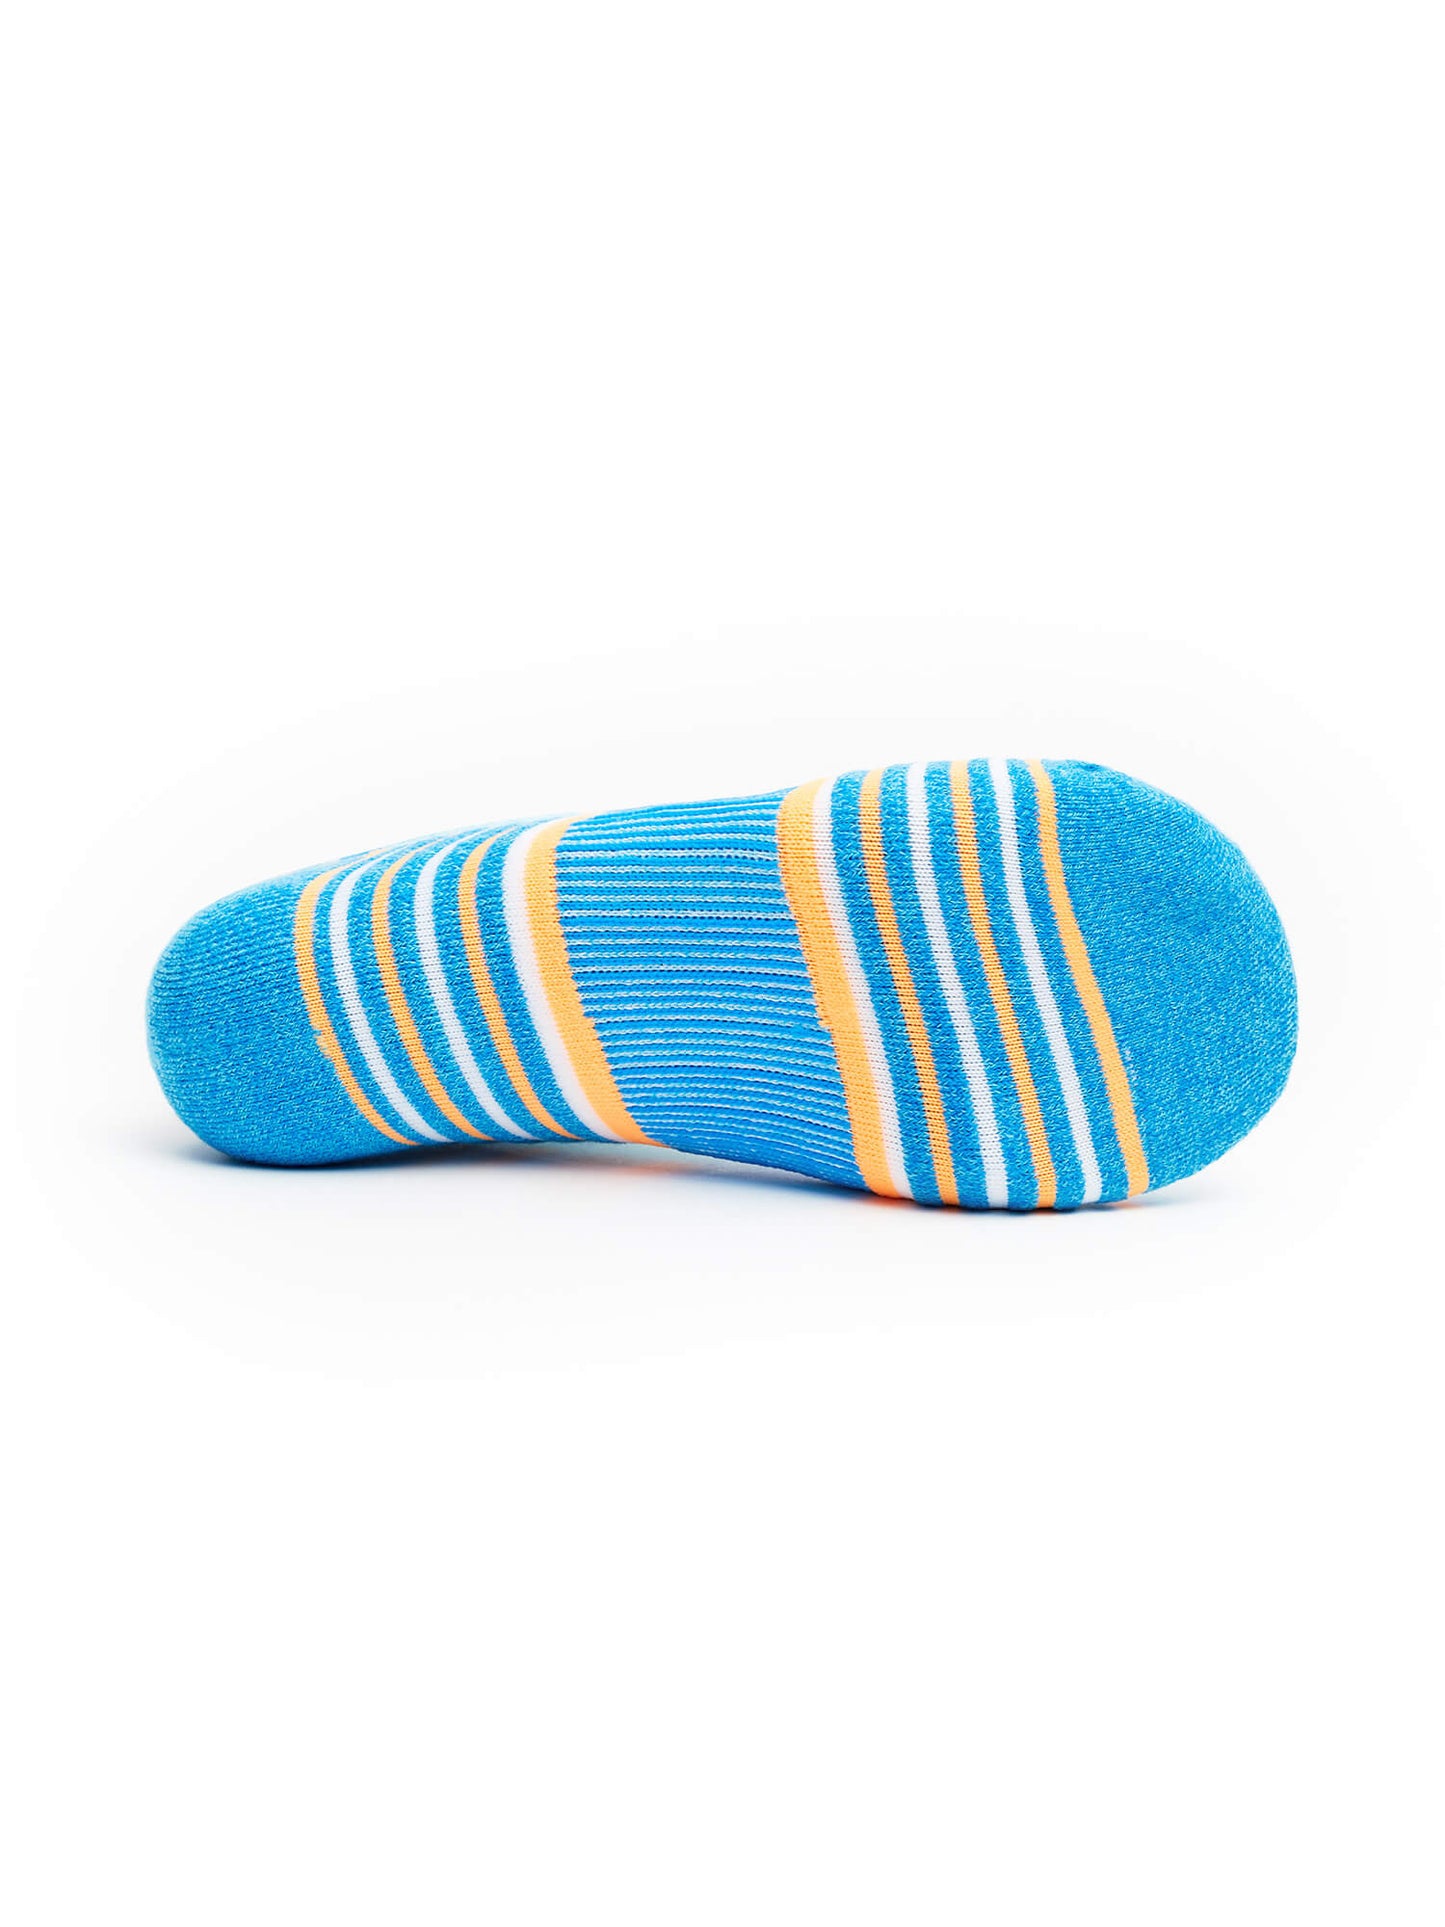 Sole of Thorlos Experia Repreve Ankle Socks in Blue